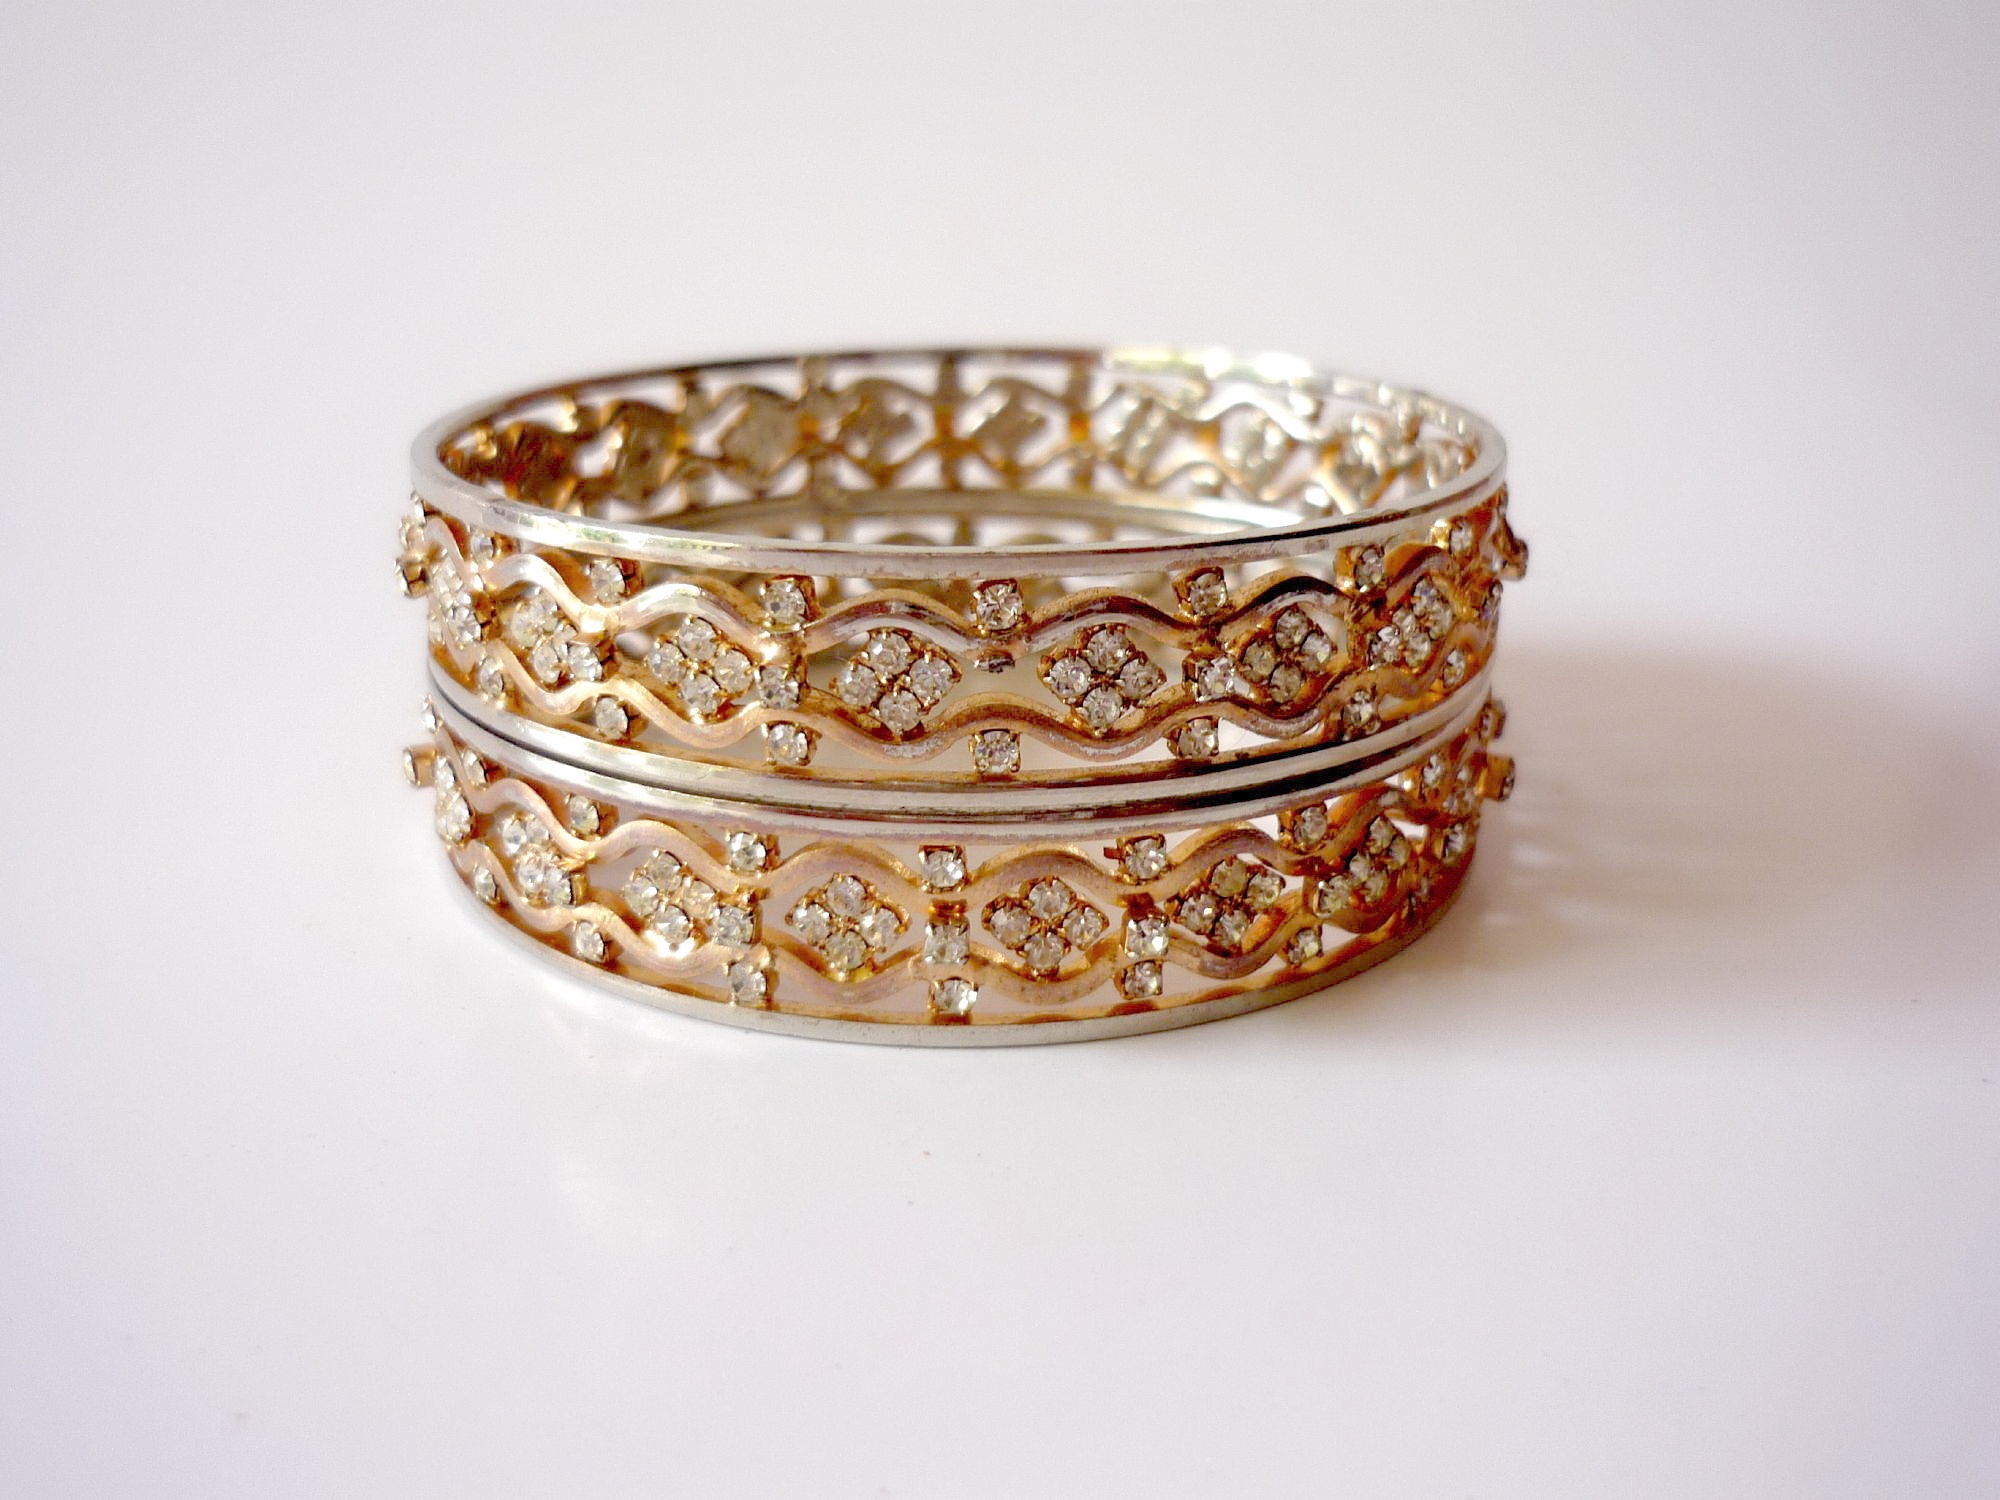 Two gold bangles photo